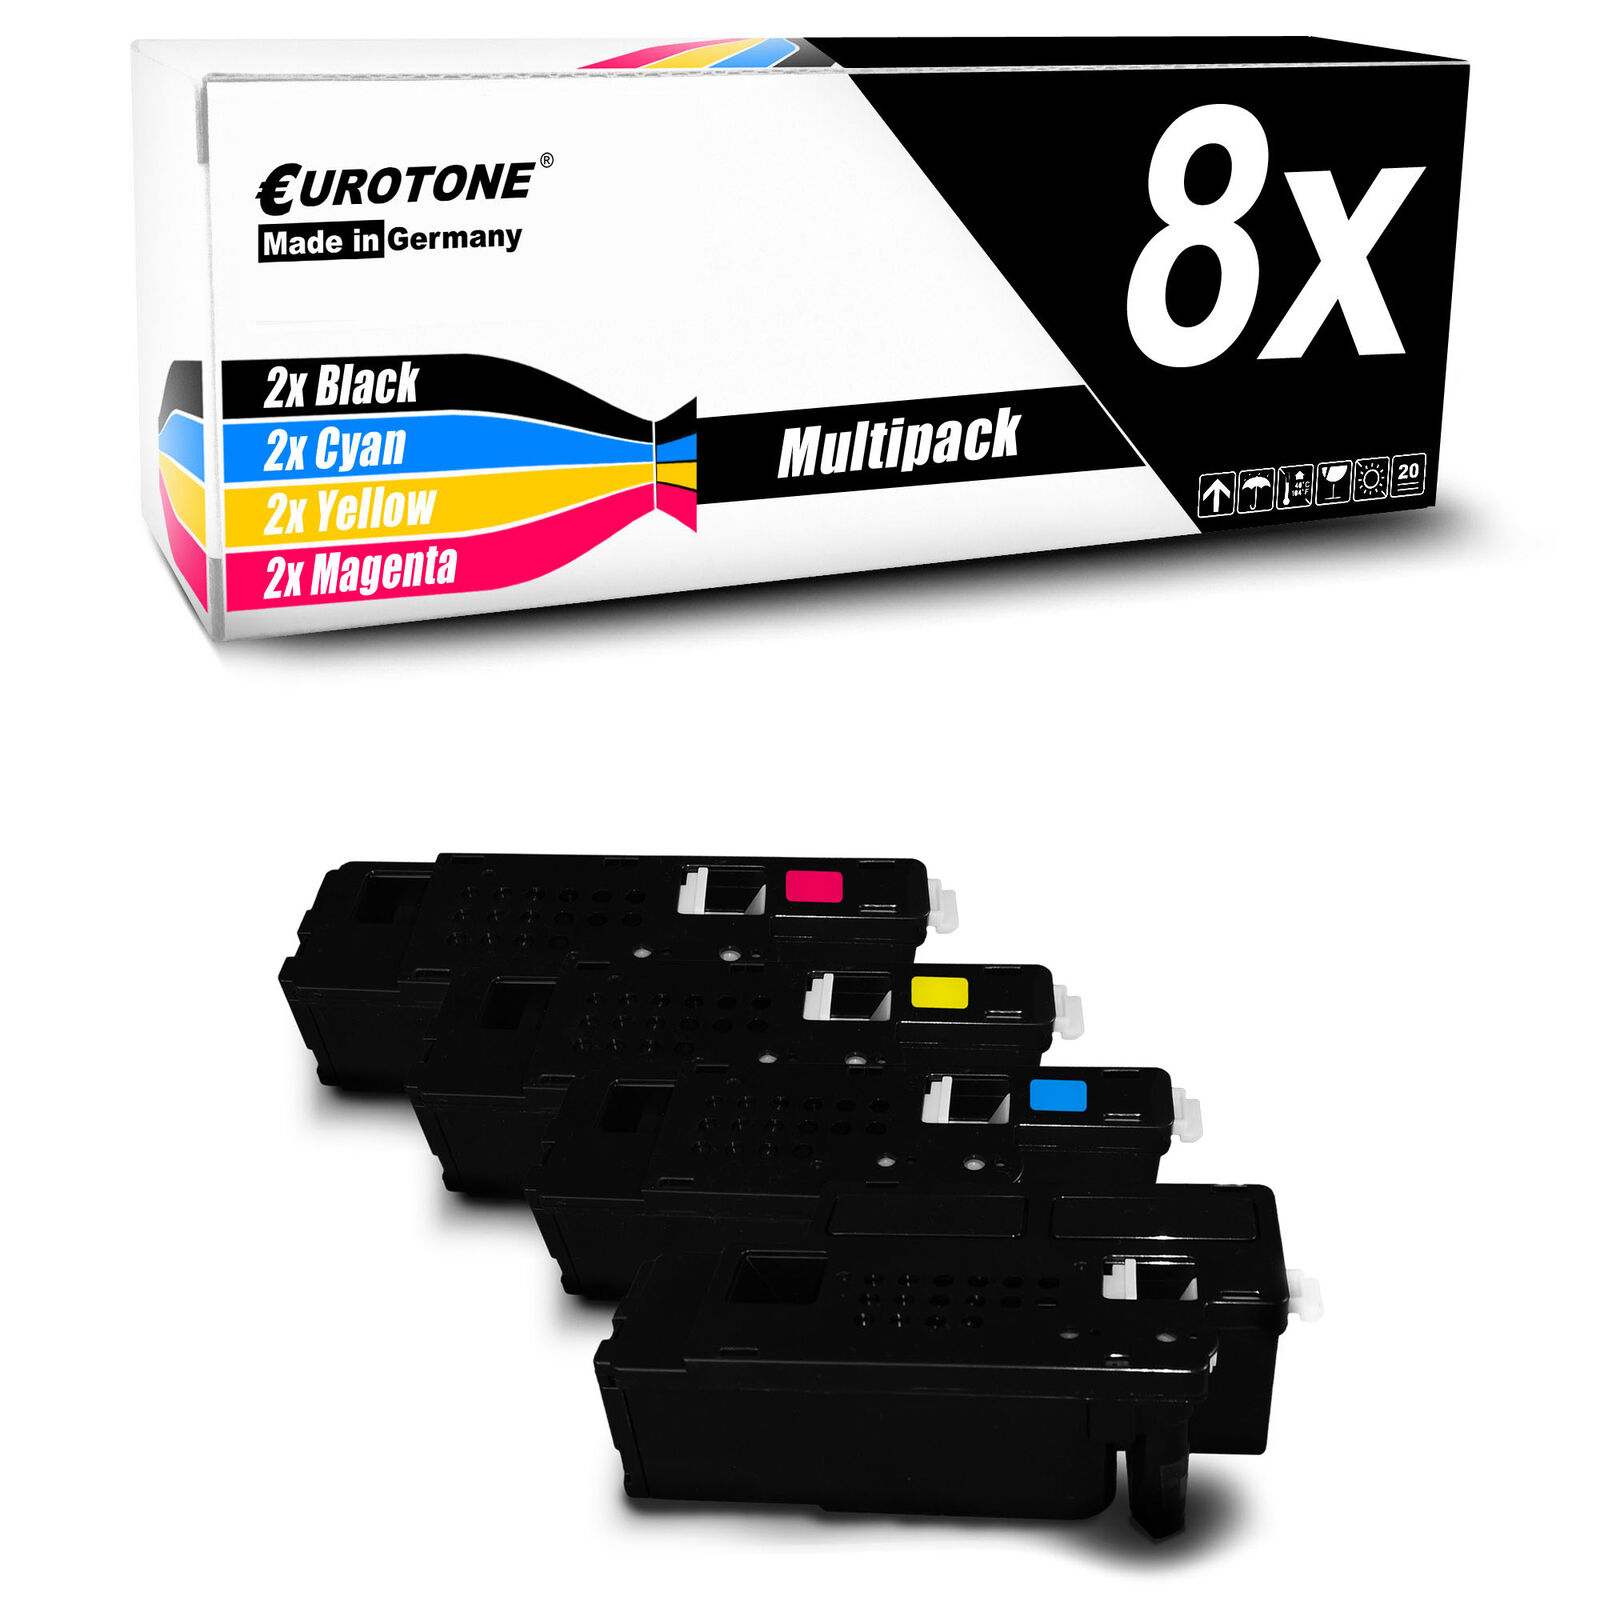 8x Cartridge Filter Cleaner for Dell